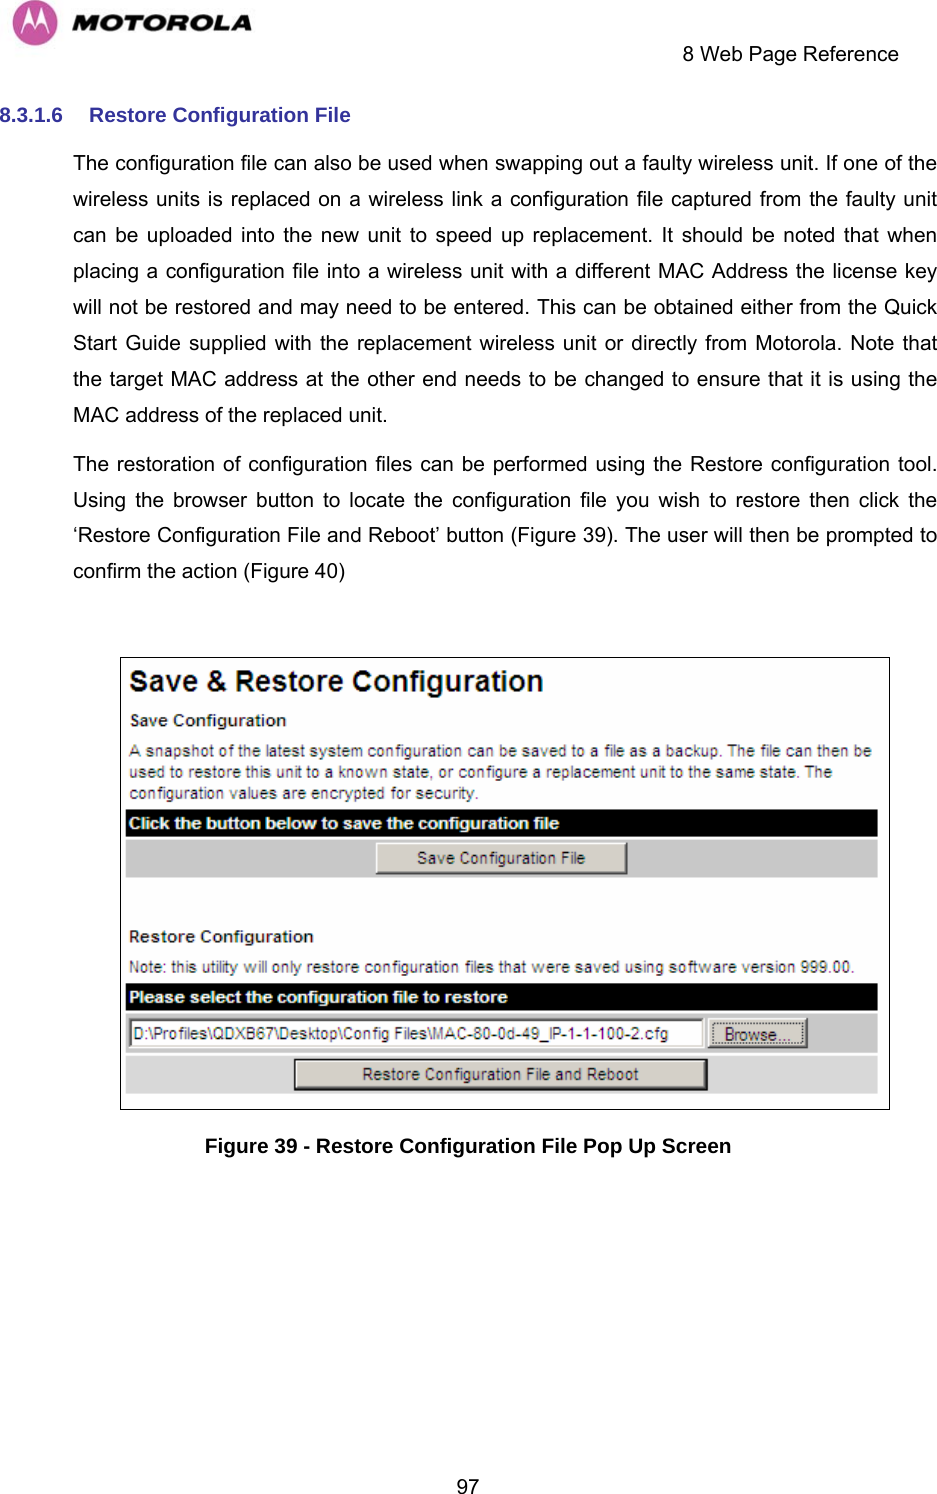     8 Web Page Reference  978.3.1.6  Restore Configuration File The configuration file can also be used when swapping out a faulty wireless unit. If one of the wireless units is replaced on a wireless link a configuration file captured from the faulty unit can be uploaded into the new unit to speed up replacement. It should be noted that when placing a configuration file into a wireless unit with a different MAC Address the license key will not be restored and may need to be entered. This can be obtained either from the Quick Start Guide supplied with the replacement wireless unit or directly from Motorola. Note that the target MAC address at the other end needs to be changed to ensure that it is using the MAC address of the replaced unit. The restoration of configuration files can be performed using the Restore configuration tool. Using the browser button to locate the configuration file you wish to restore then click the ‘Restore Configuration File and Reboot’ button (Figure 39). The user will then be prompted to confirm the action (Figure 40)   Figure 39 - Restore Configuration File Pop Up Screen 